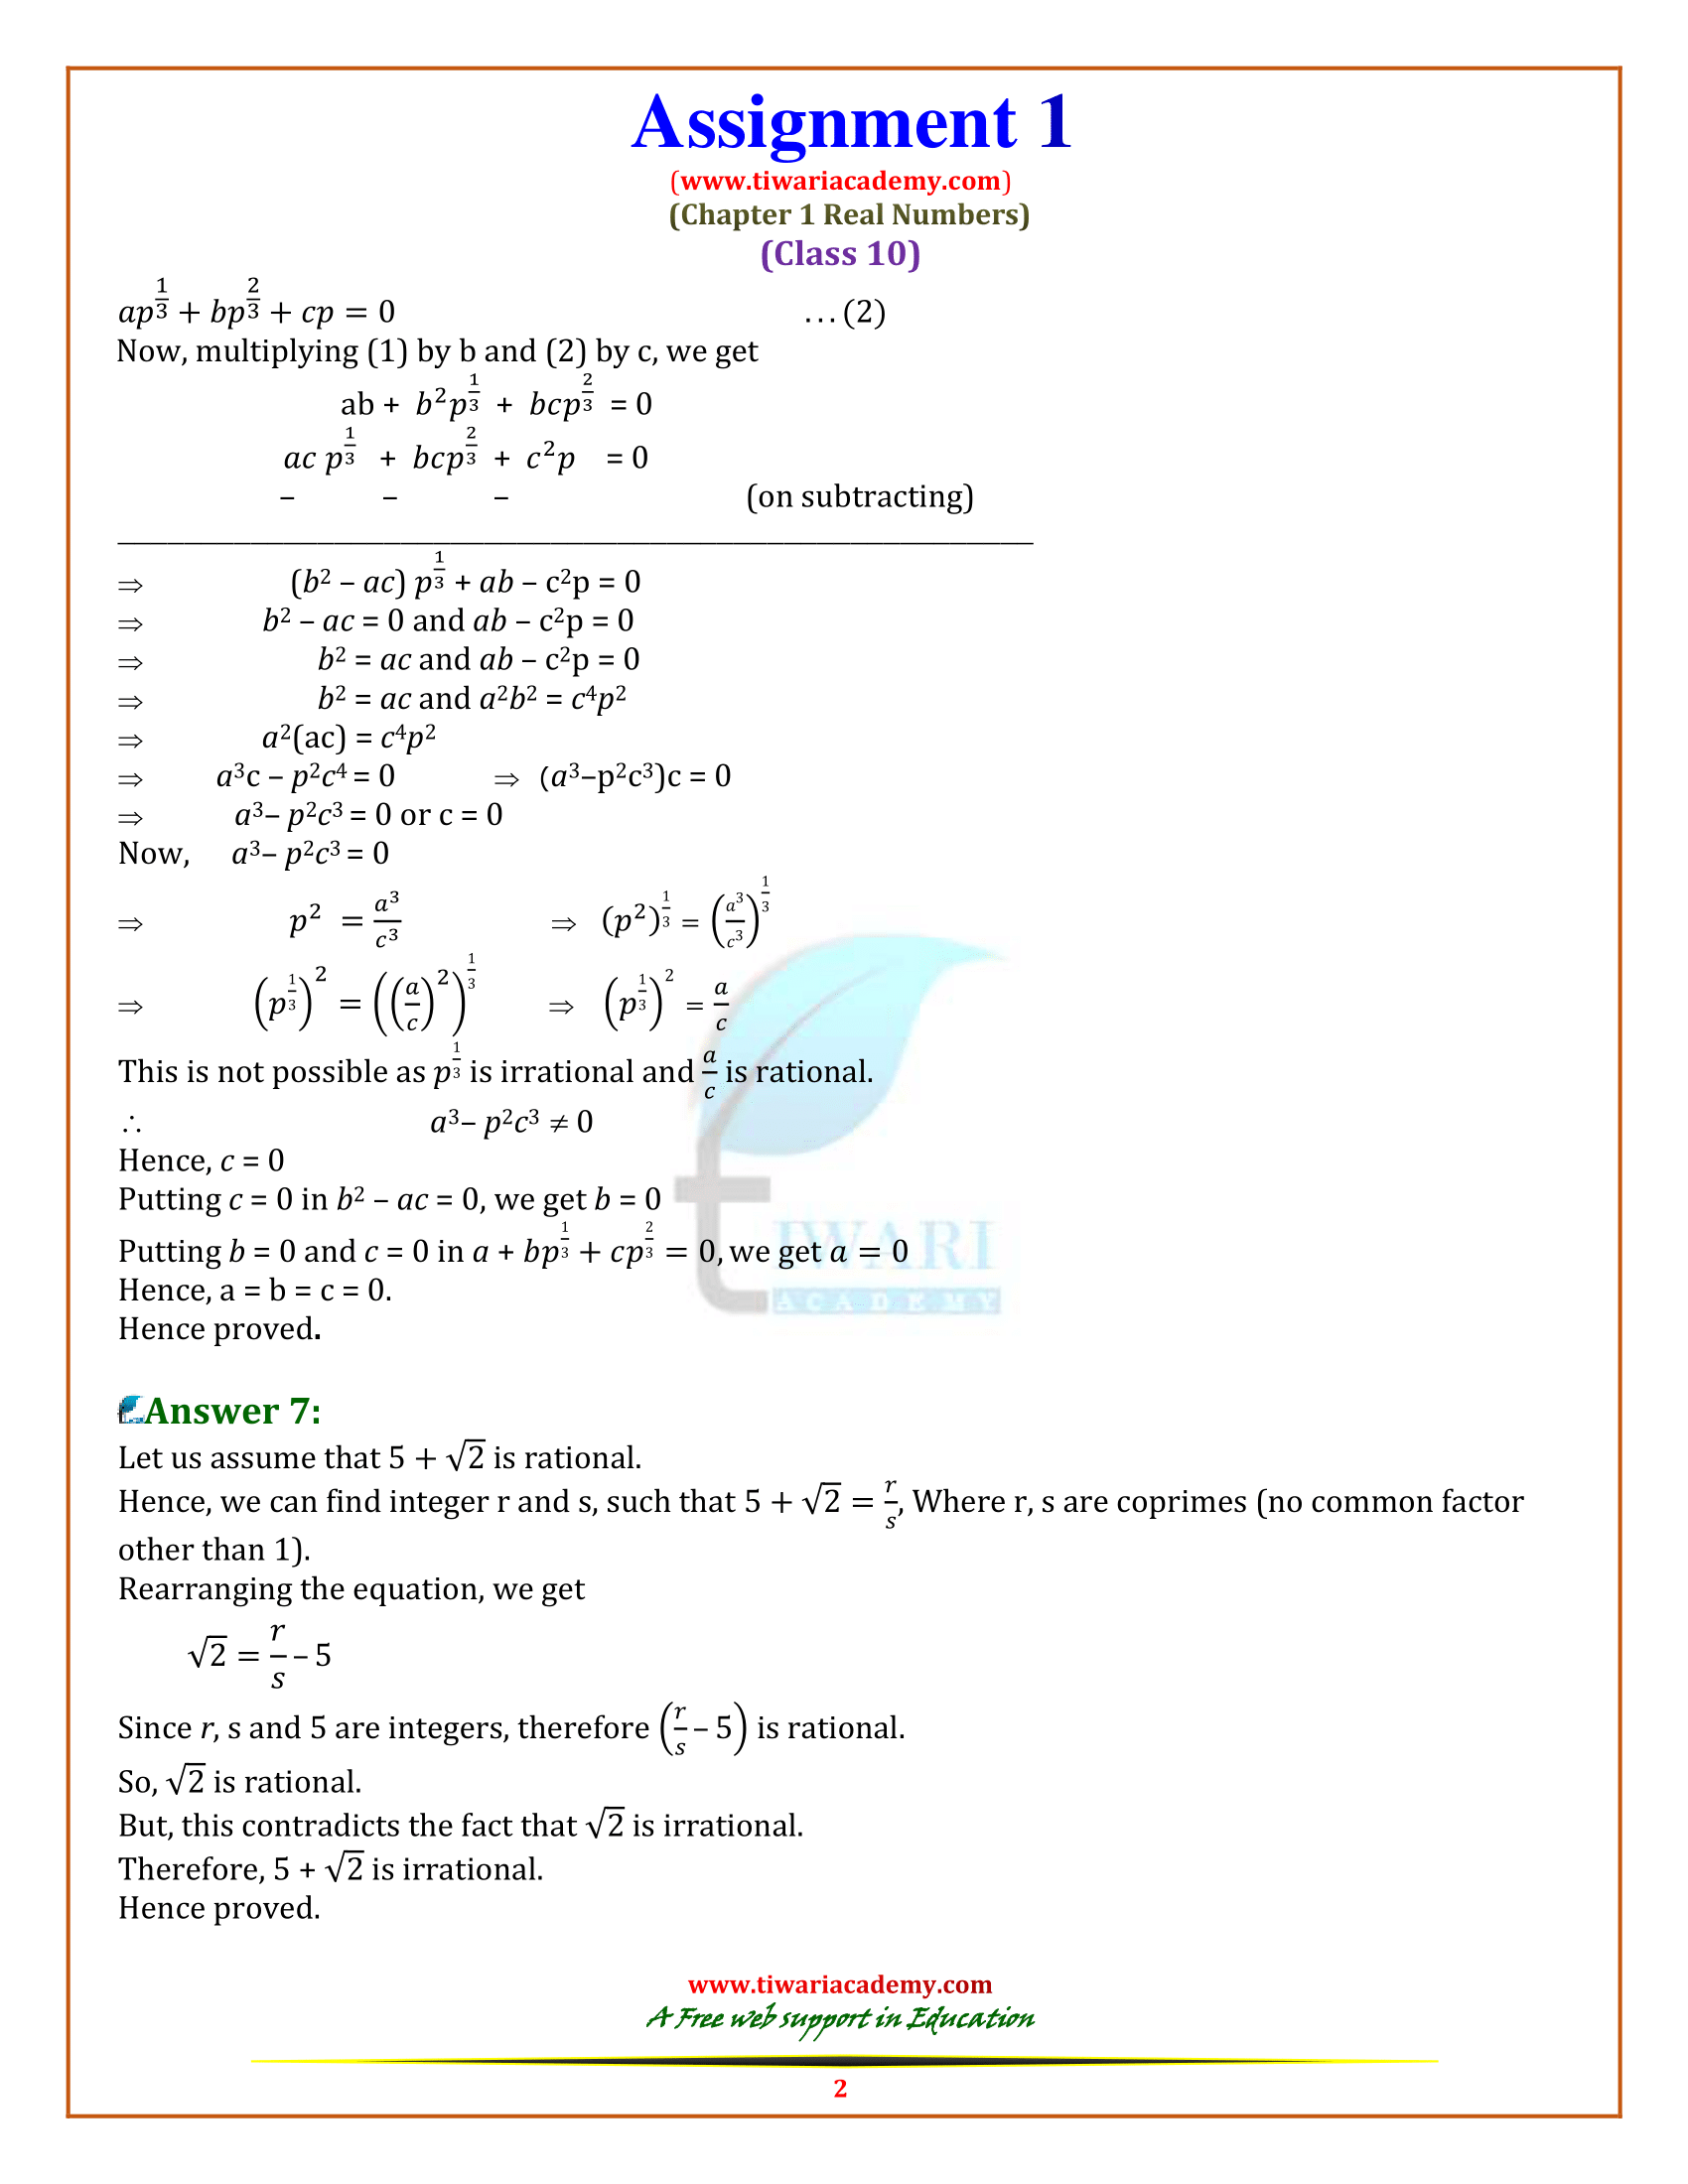 Assignments for Class 10 Maths Chapter 1 solutions